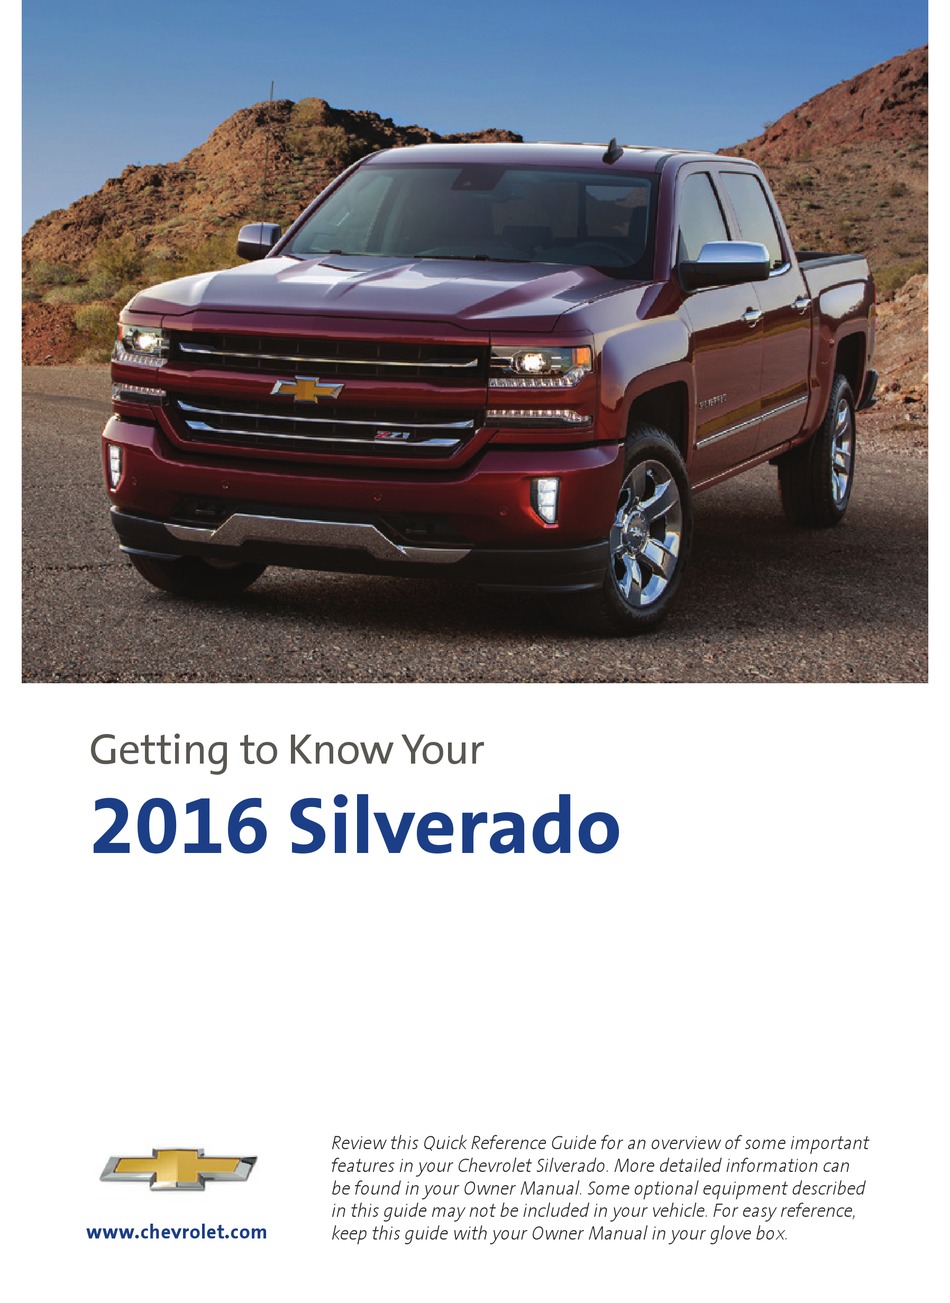 2016 Chevrolet Silverado 1500 2500 3500 Owners Manual with warranty guide 